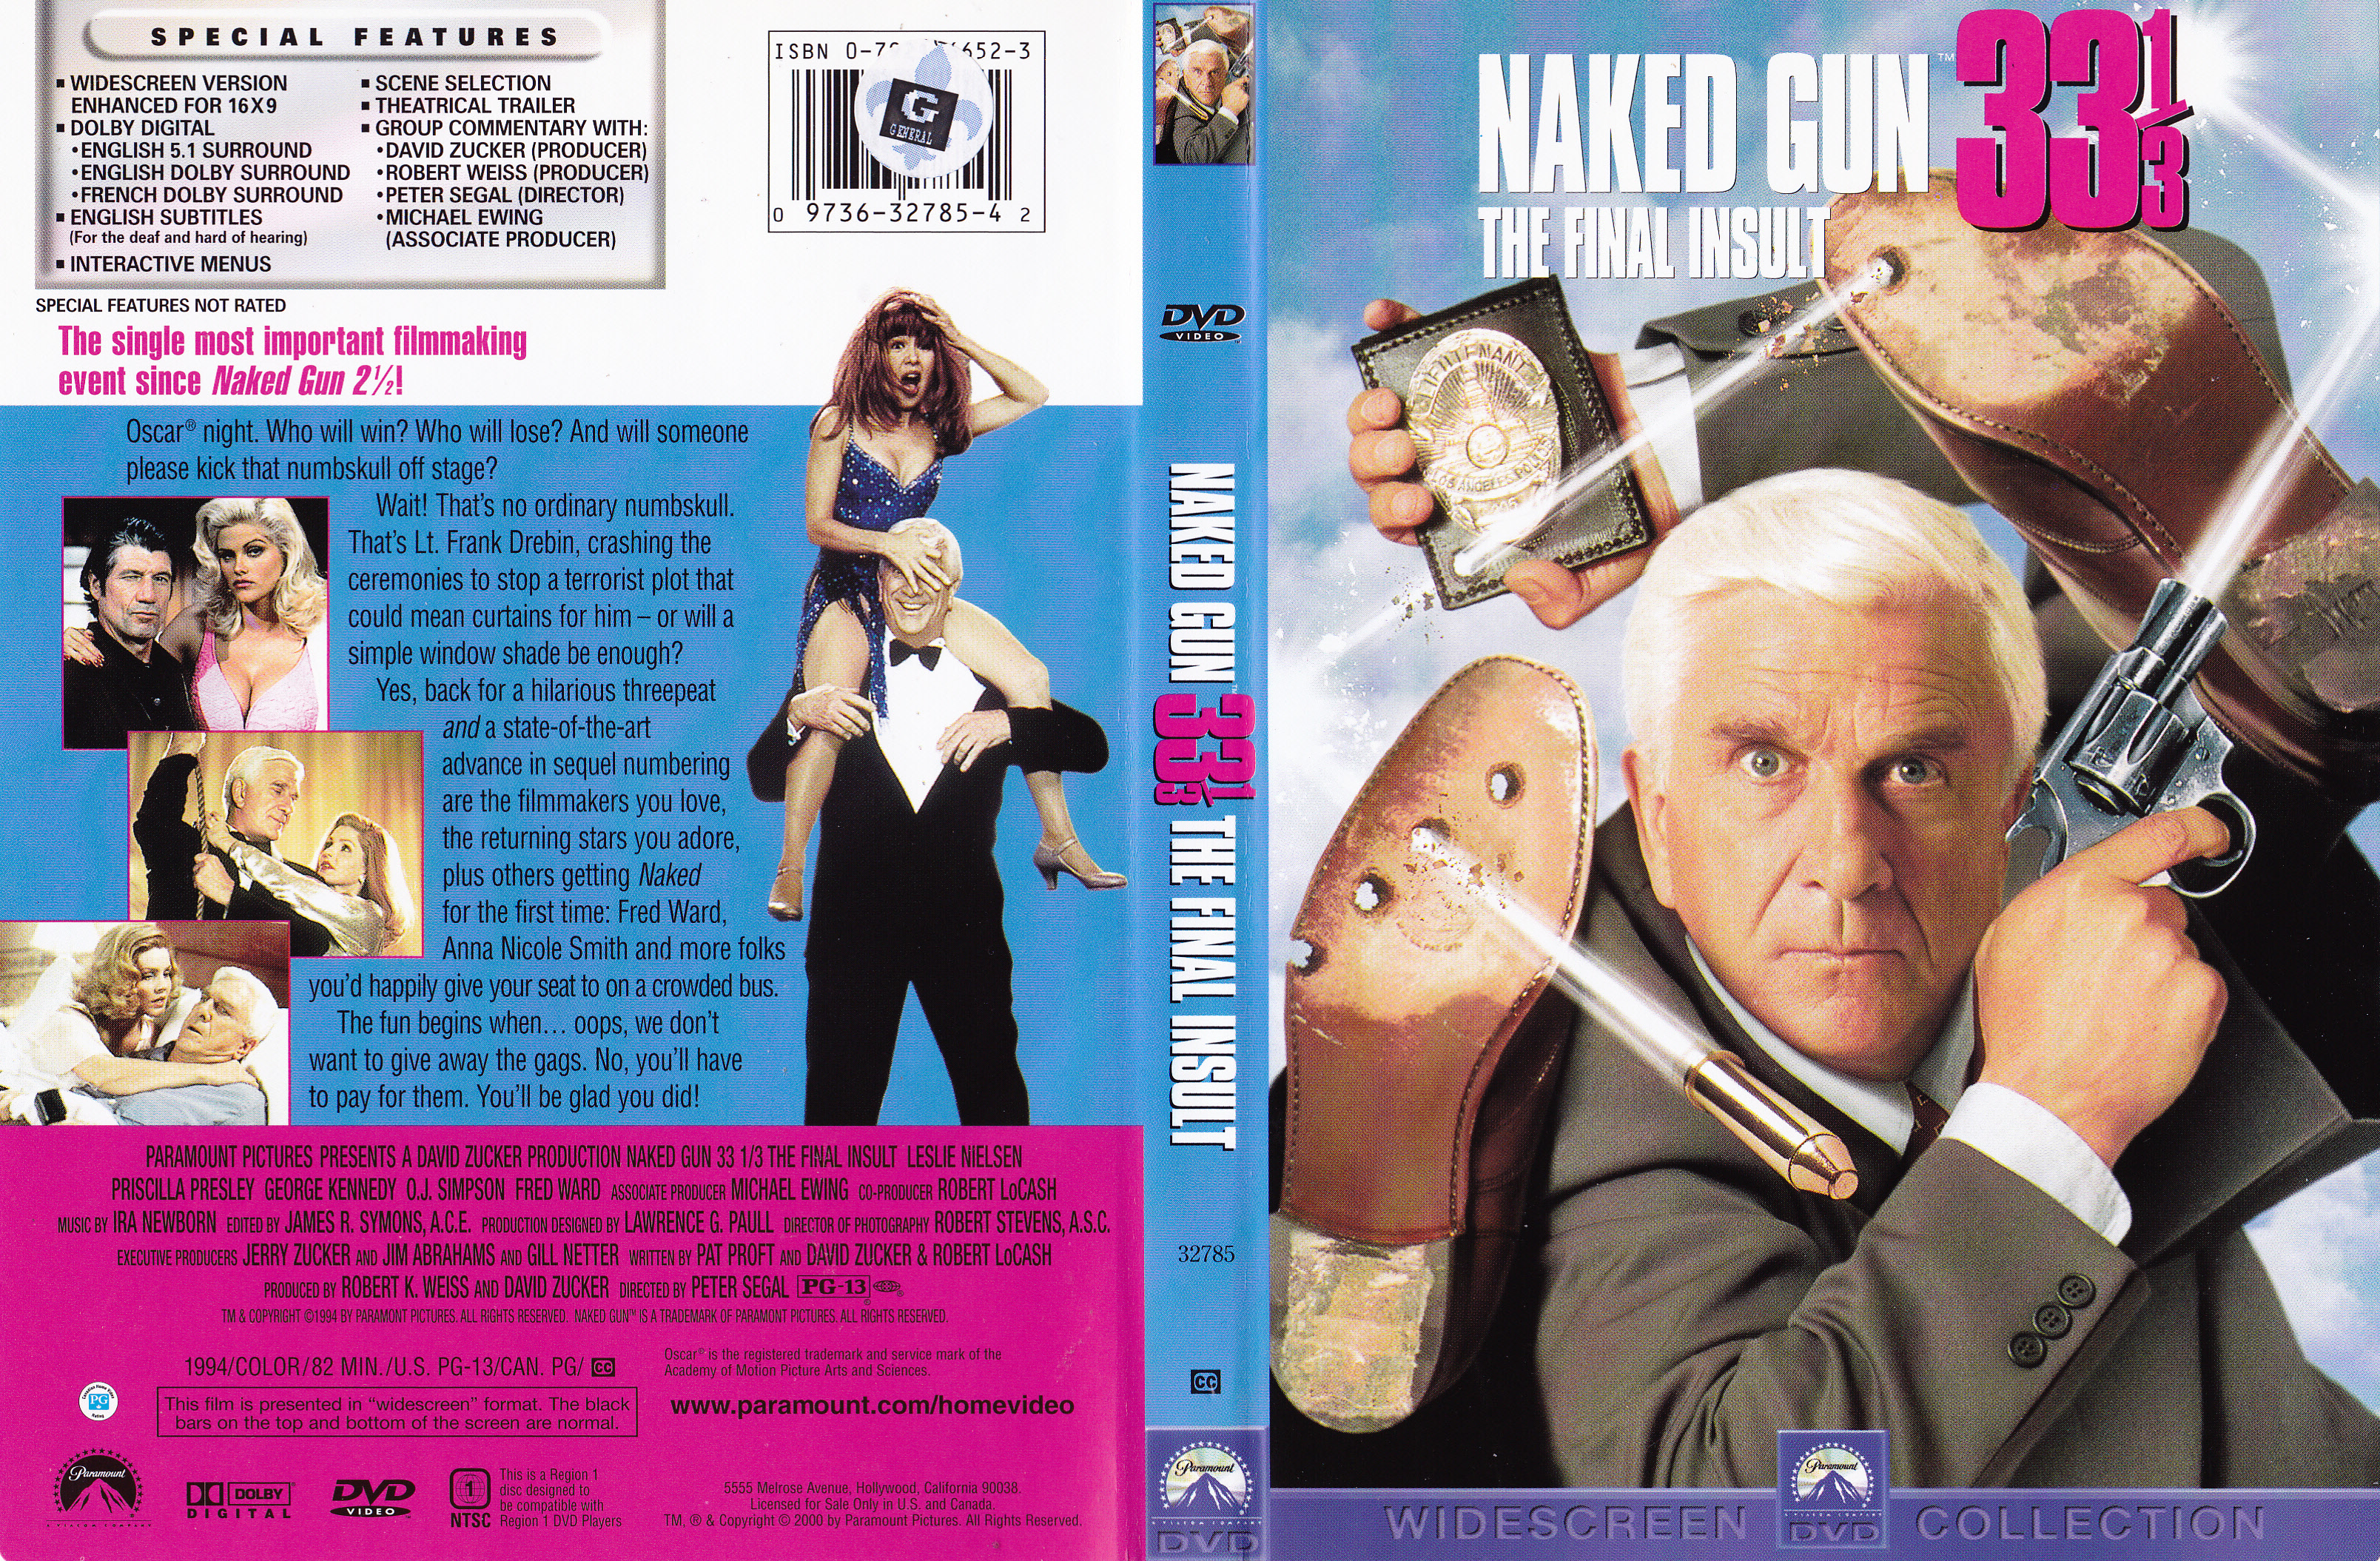 Jaquette DVD Naked gun 33 the final insult - Y a-t-il un flic pour sauver Hollywood (Canadienne)